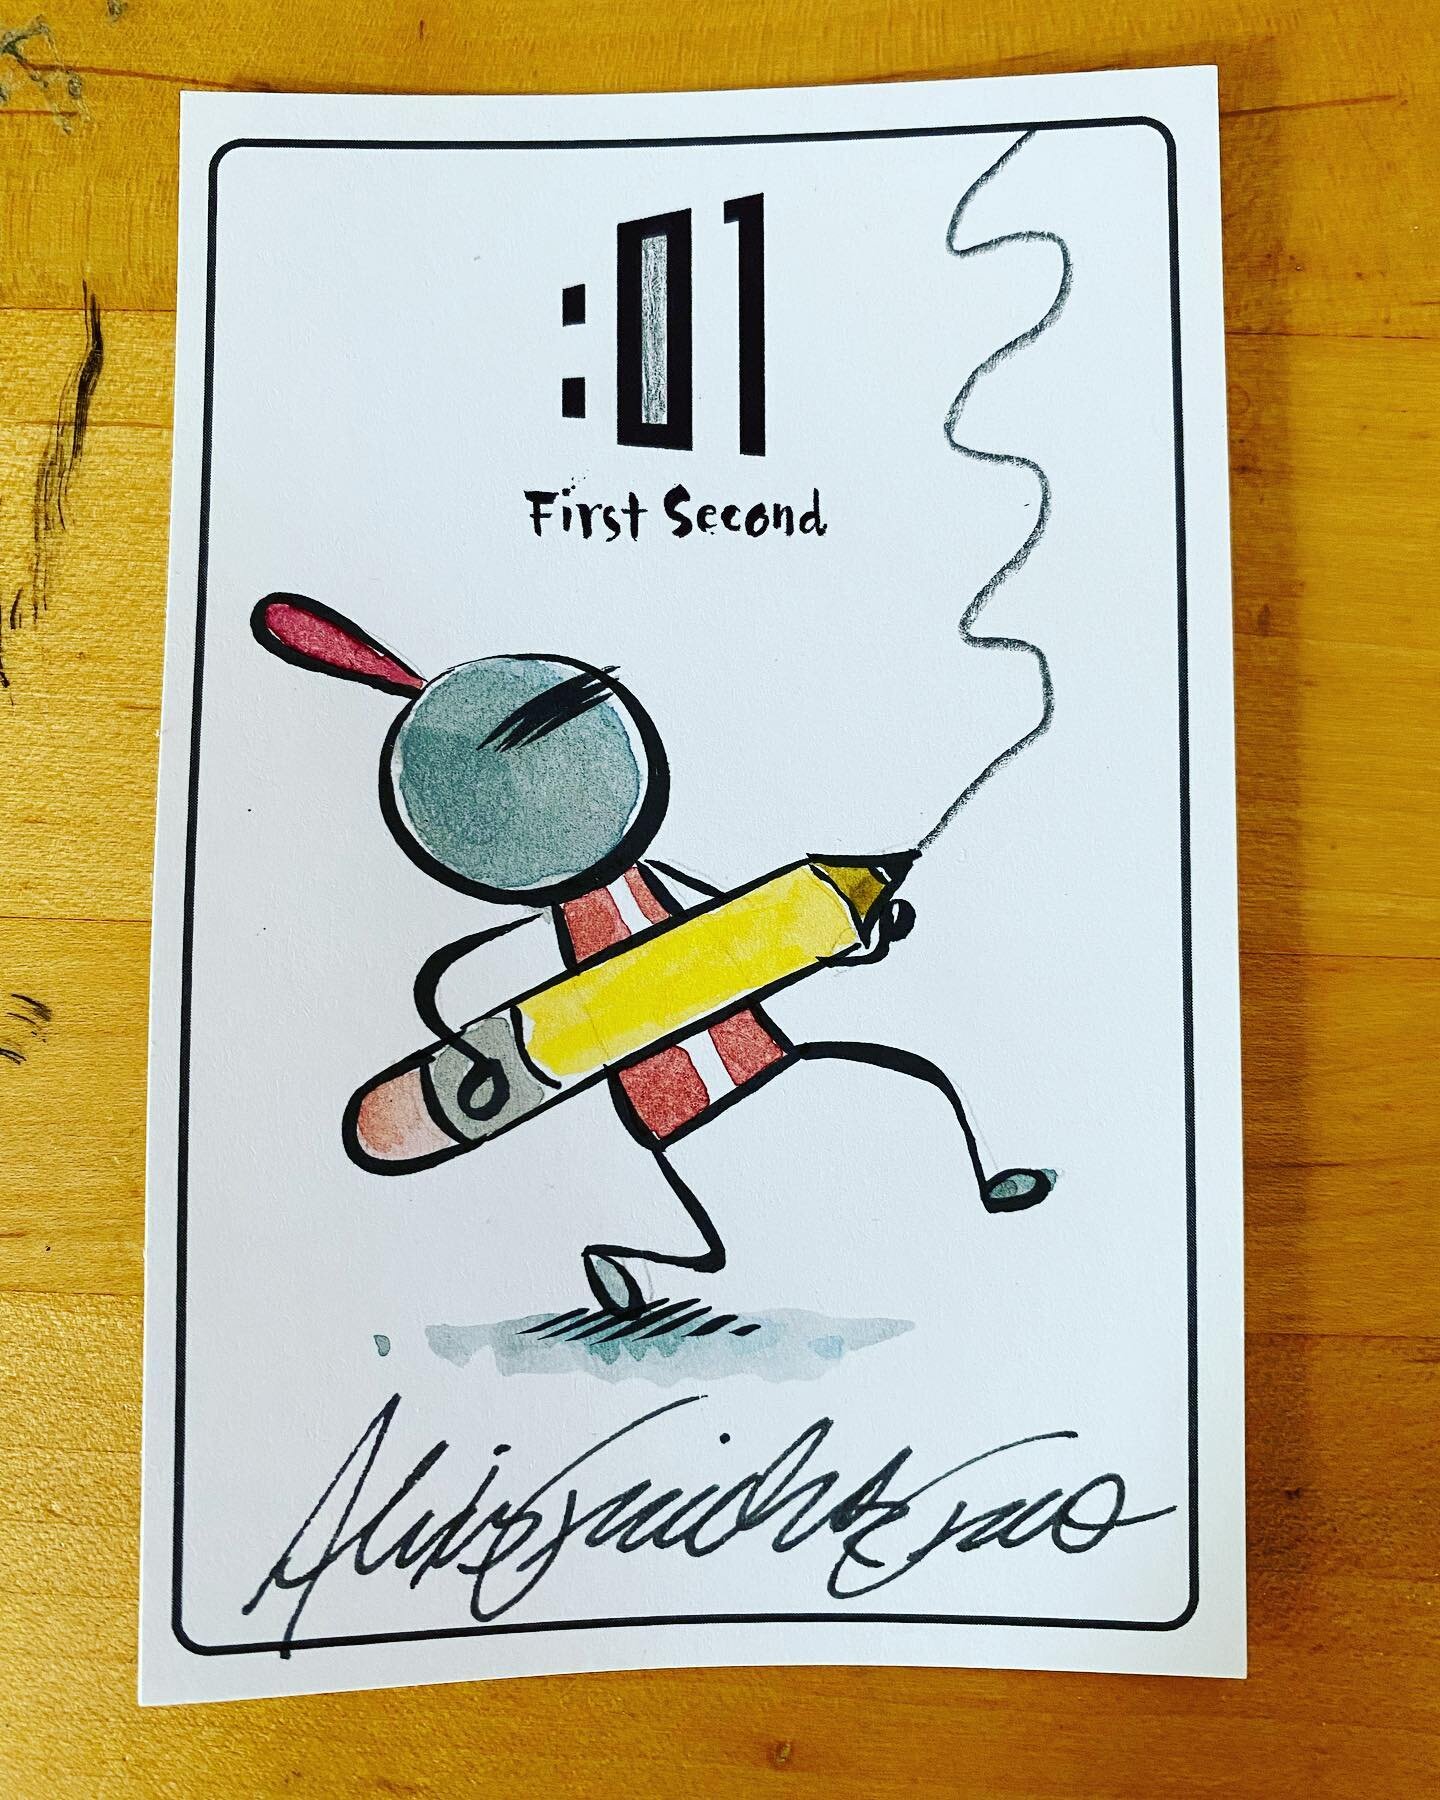 A few more bookplates for the launch of ADVENTURES IN CARTOONING: CREATE A WORLD. Available in August !!!
.
.
.
#kidlit #kidlitart #kidsgraphicnovels #childrensbooks #childrenillustration #adventuresincartooning #mackidsbooks #roaringbrookpress #firs